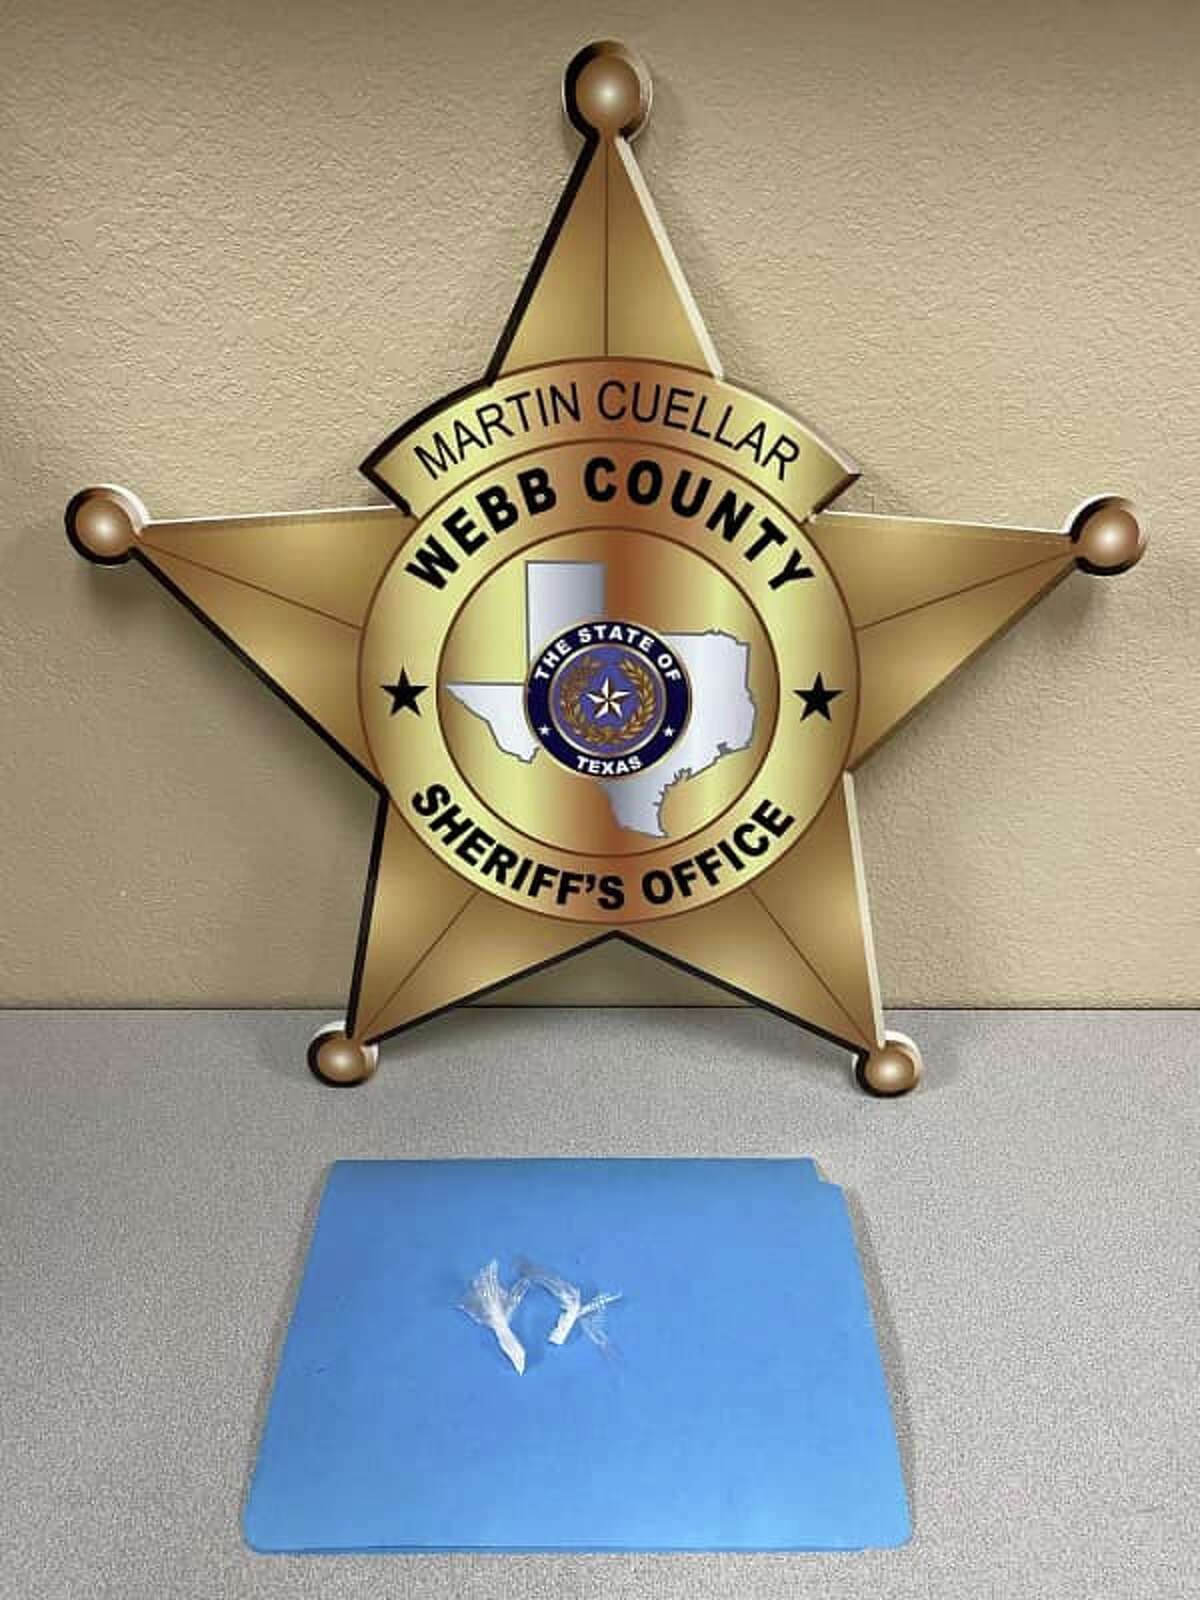 The Webb County Sheriff's Office seized 0.6 grams of fentanyl following a raid in the City of Rio Bravo. A man was arrested in relation to the case.